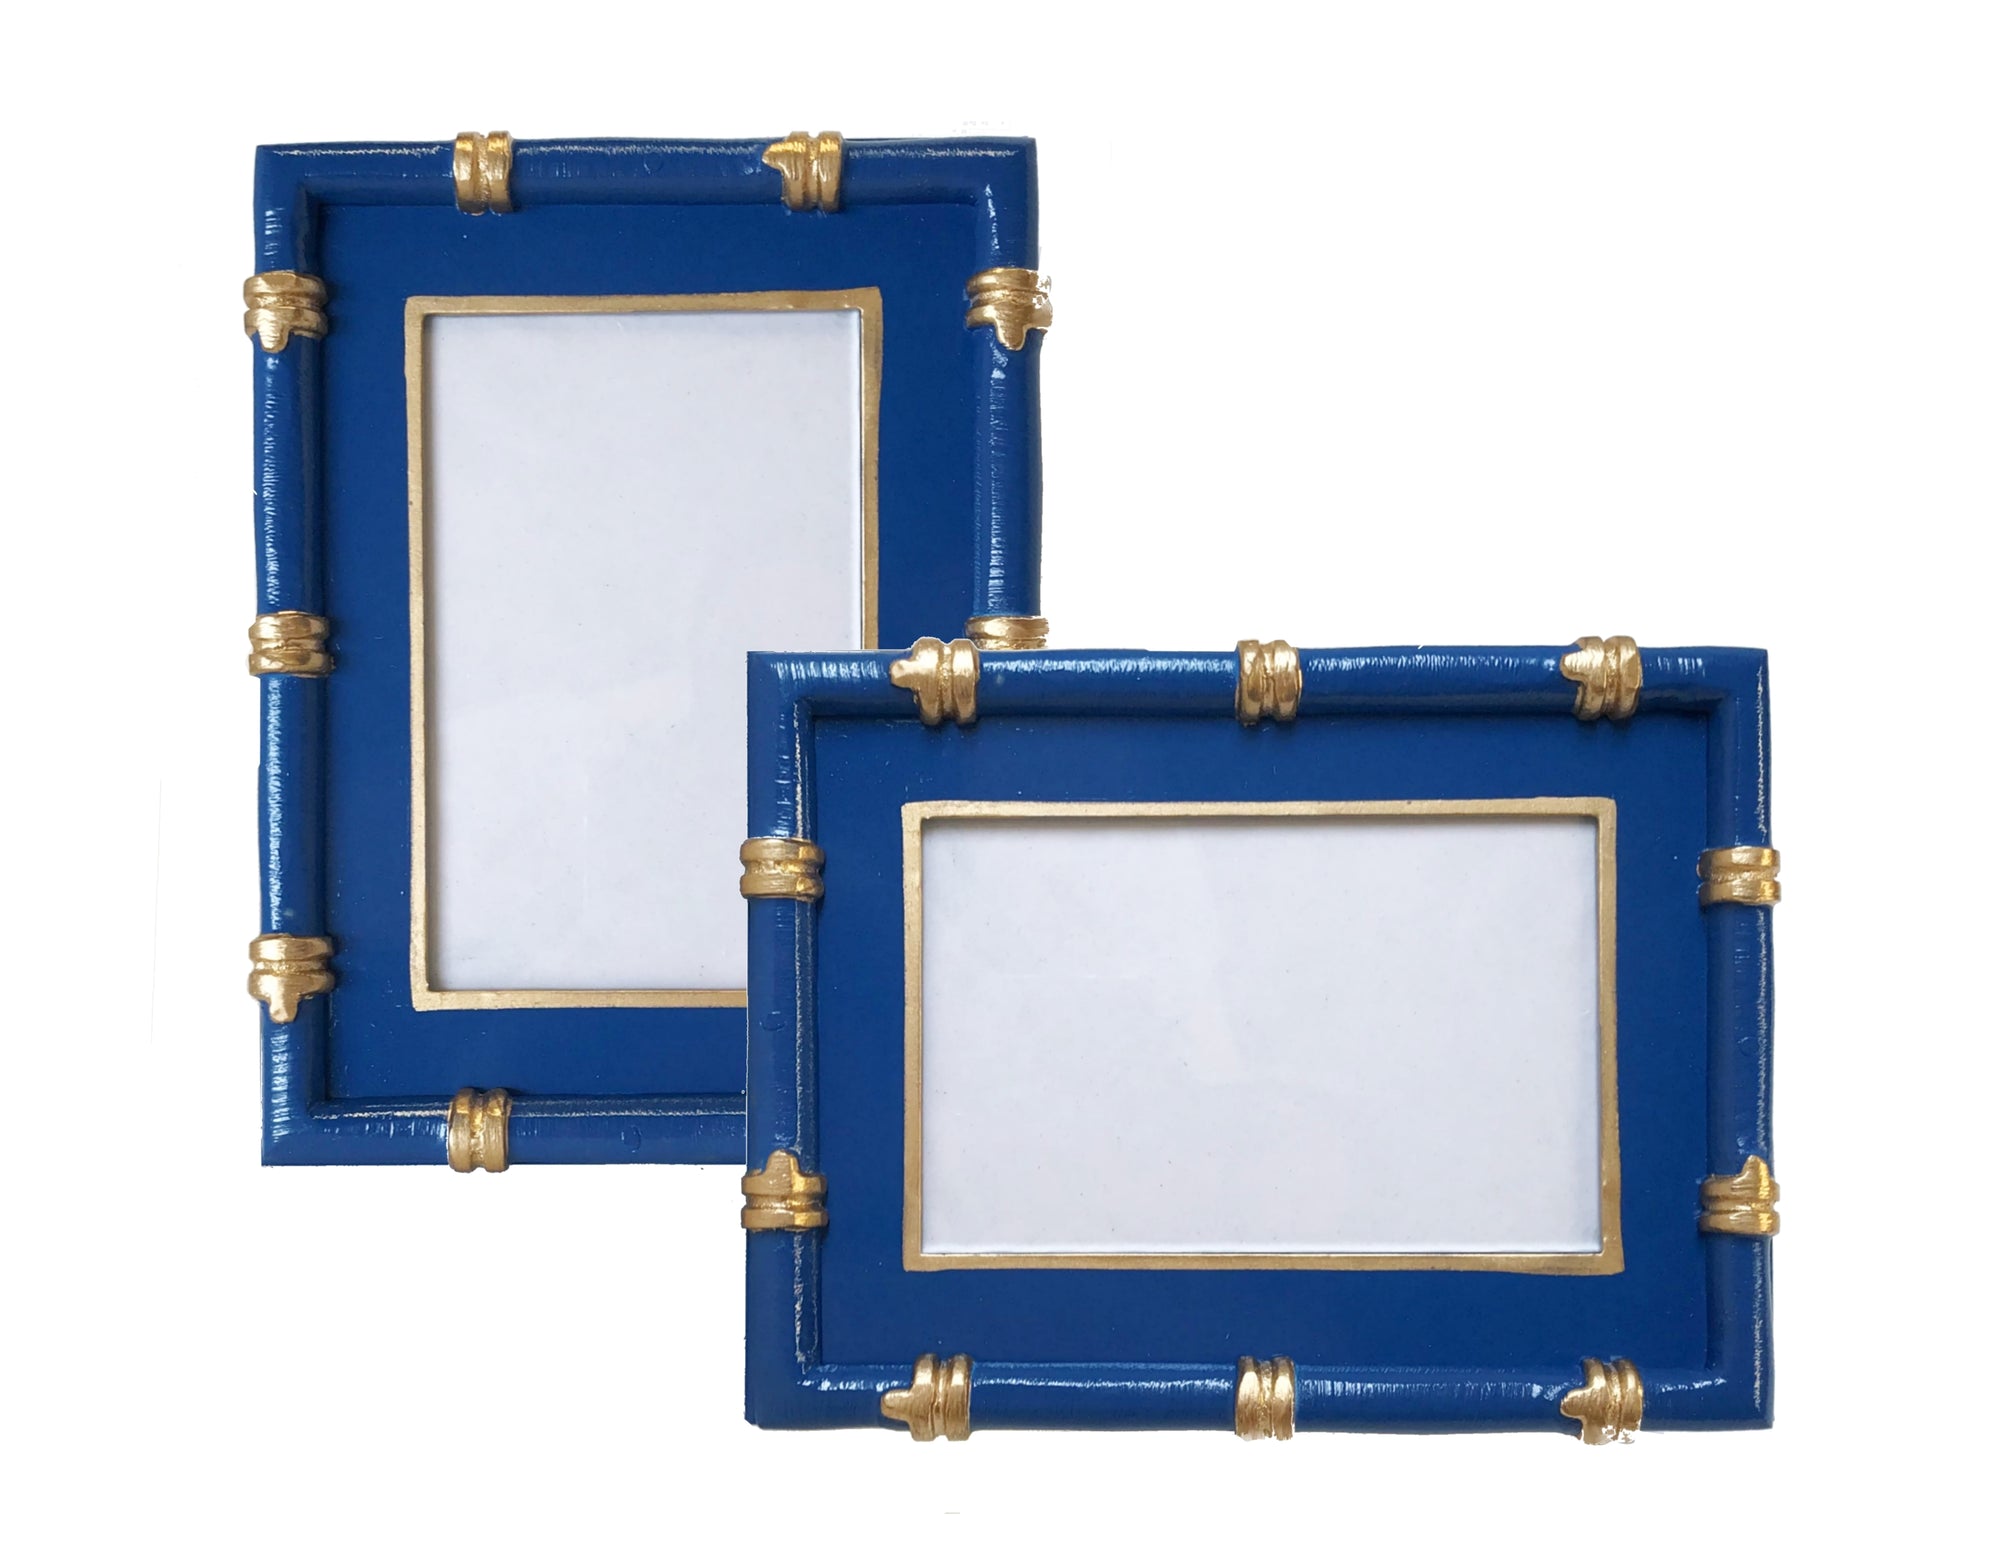 Bamboo in Navy Picture Frame by Dana Gibson 2ndQ